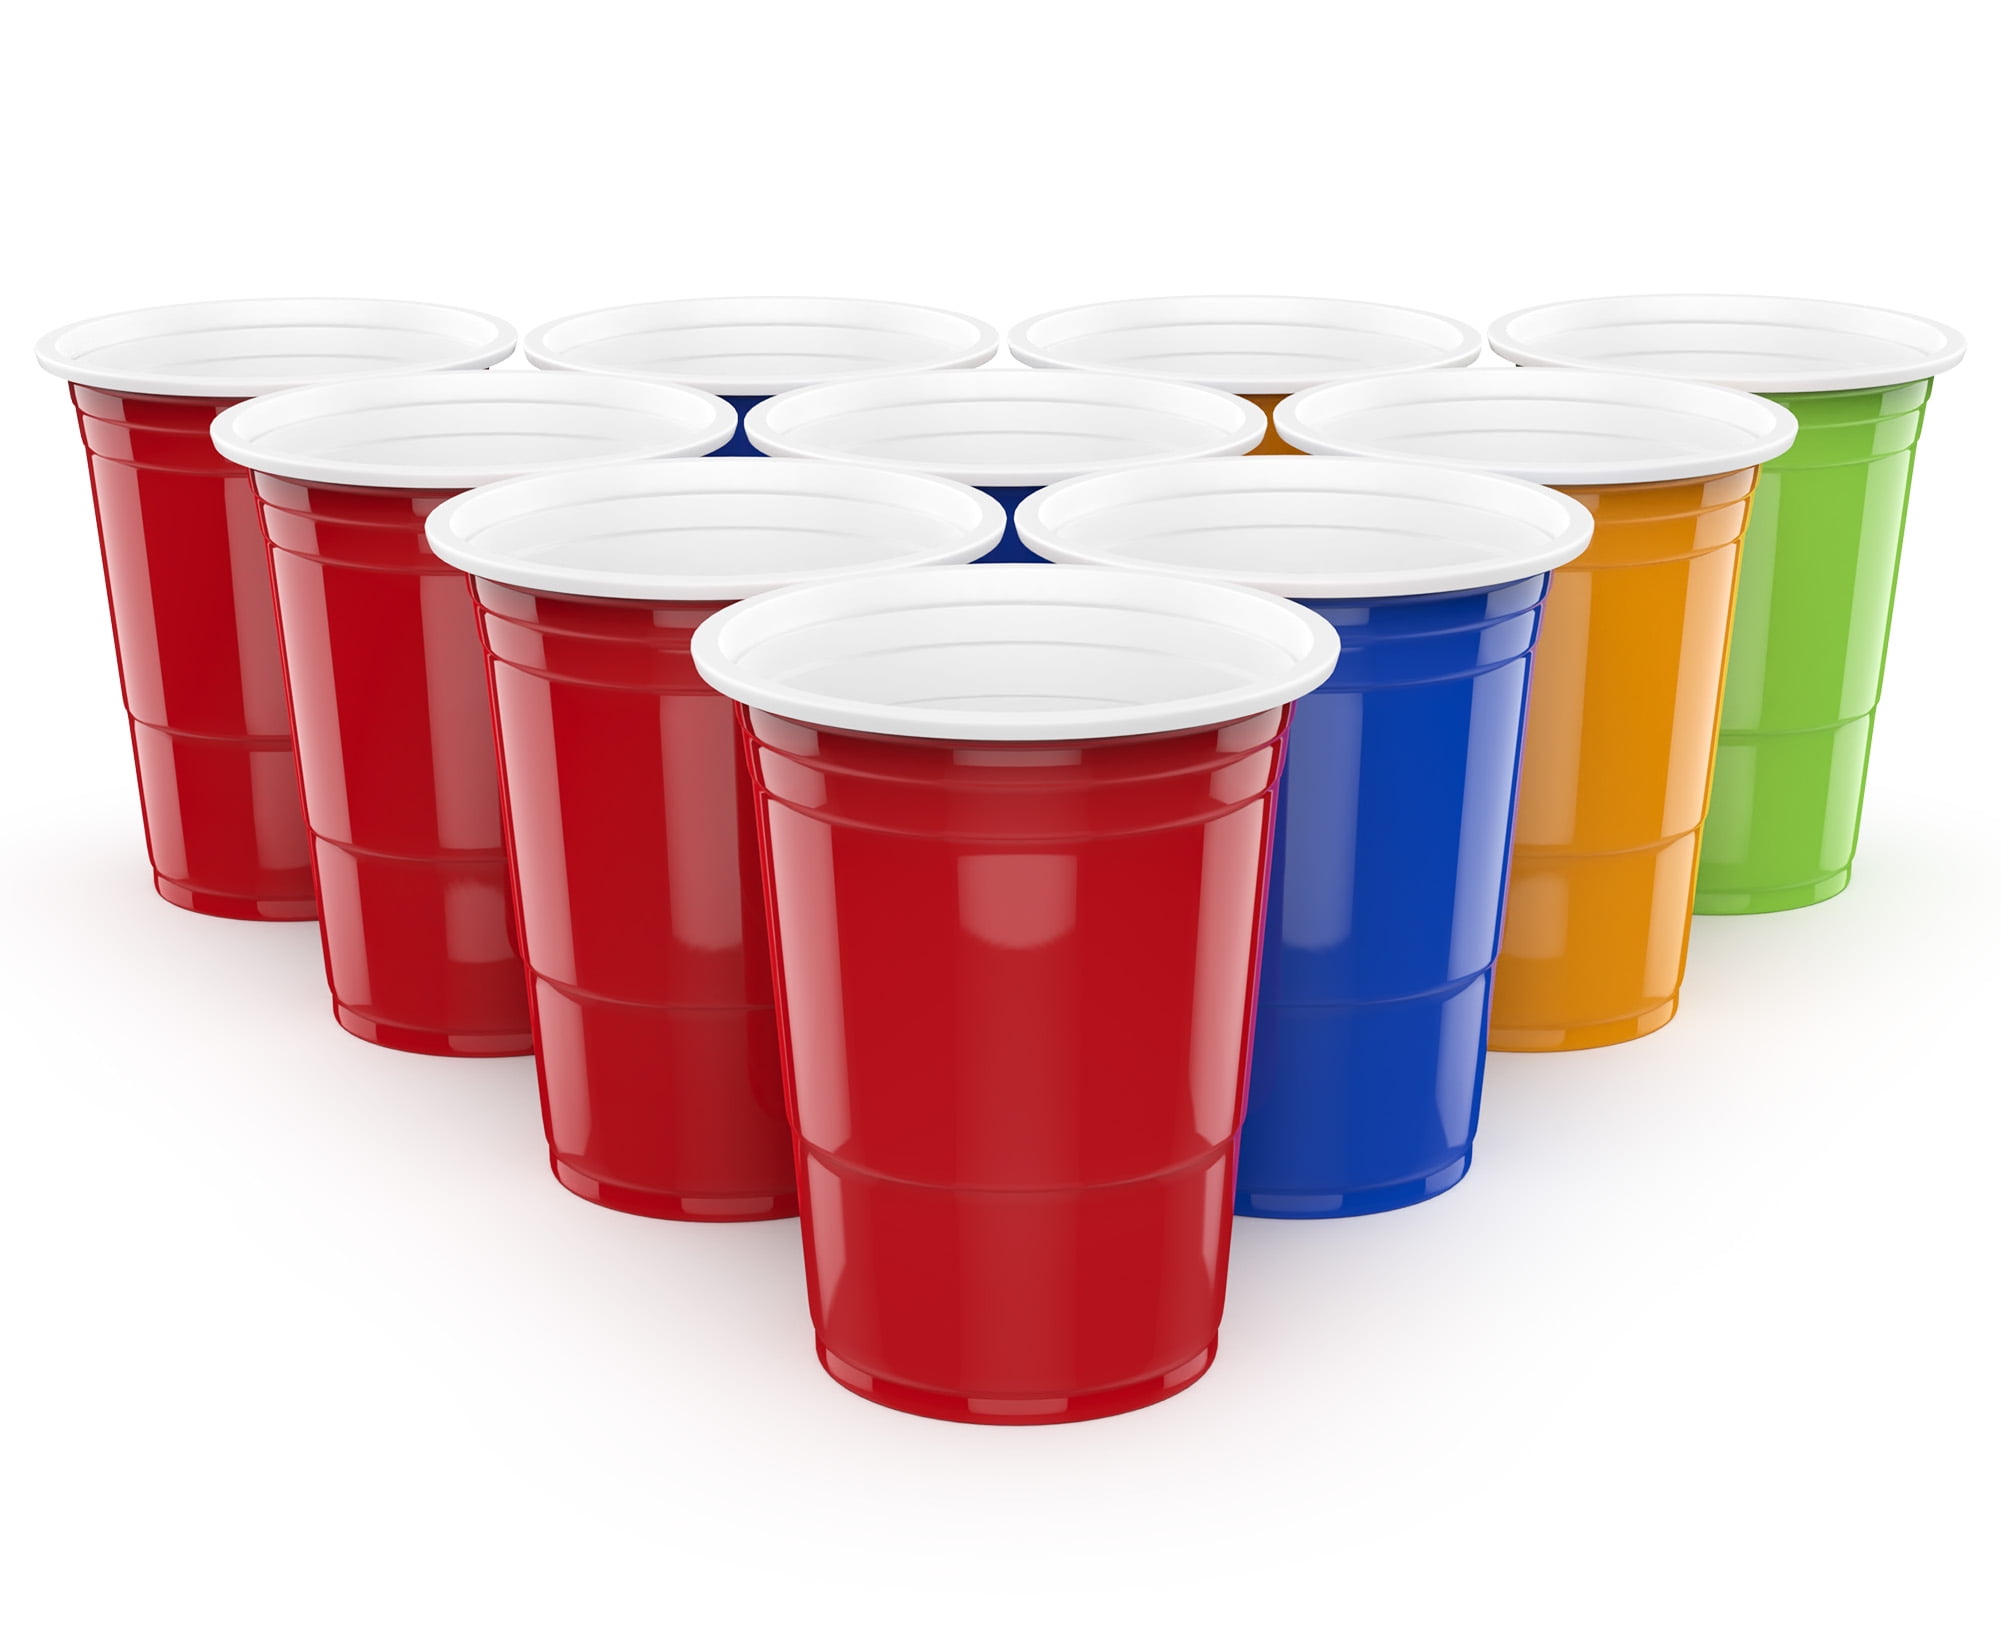 Red Plastic Party Cup Pool Party Birthday All Occasion American Disposable  16oz Tableware for All Events Parties and Games 50pcs -  Hong Kong